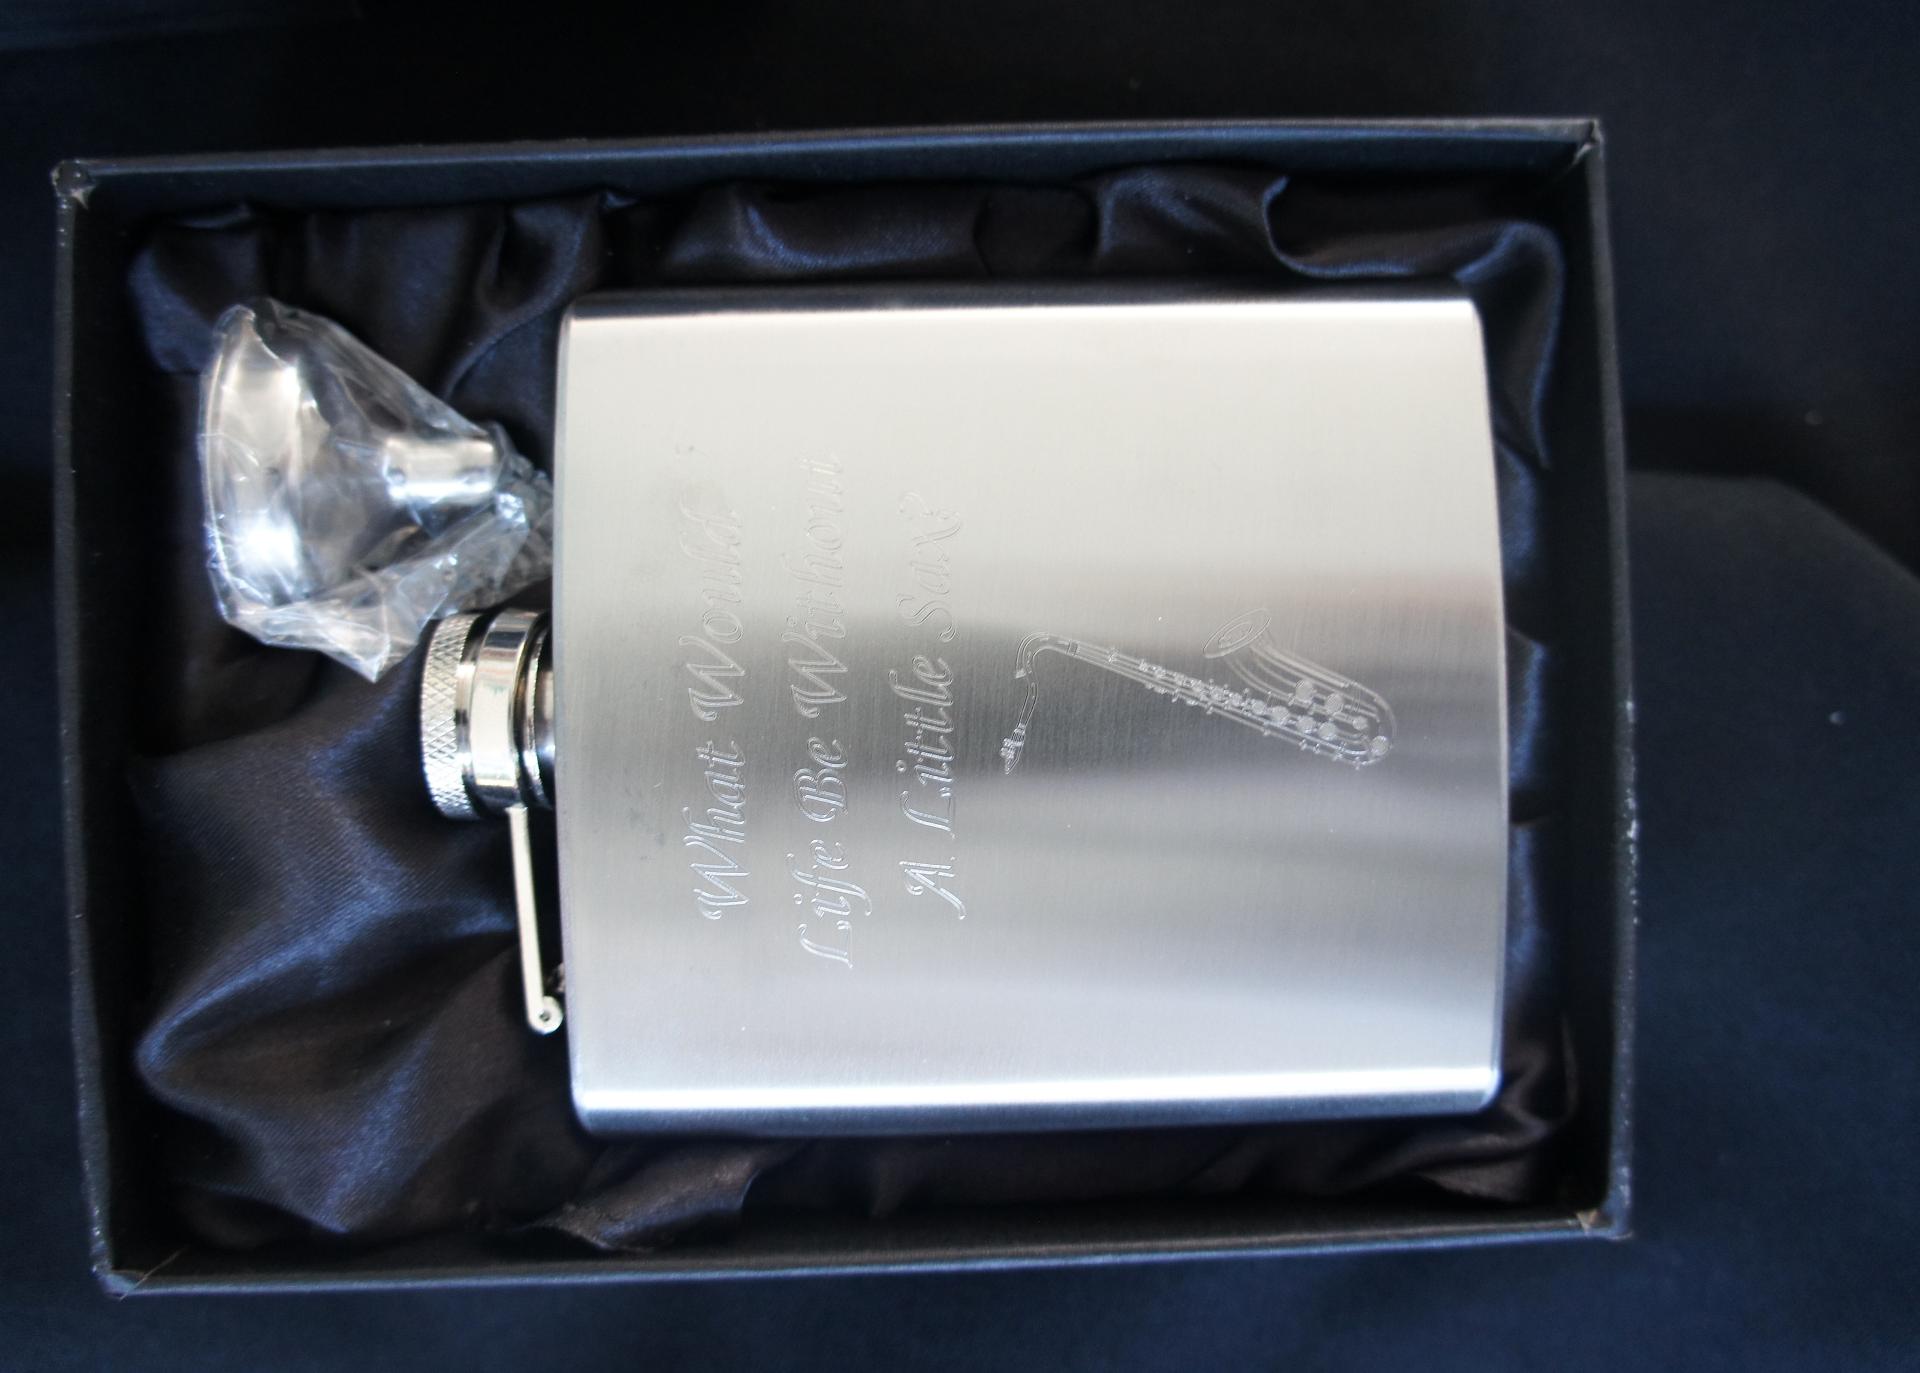 Hip Flasks With Musical Theme